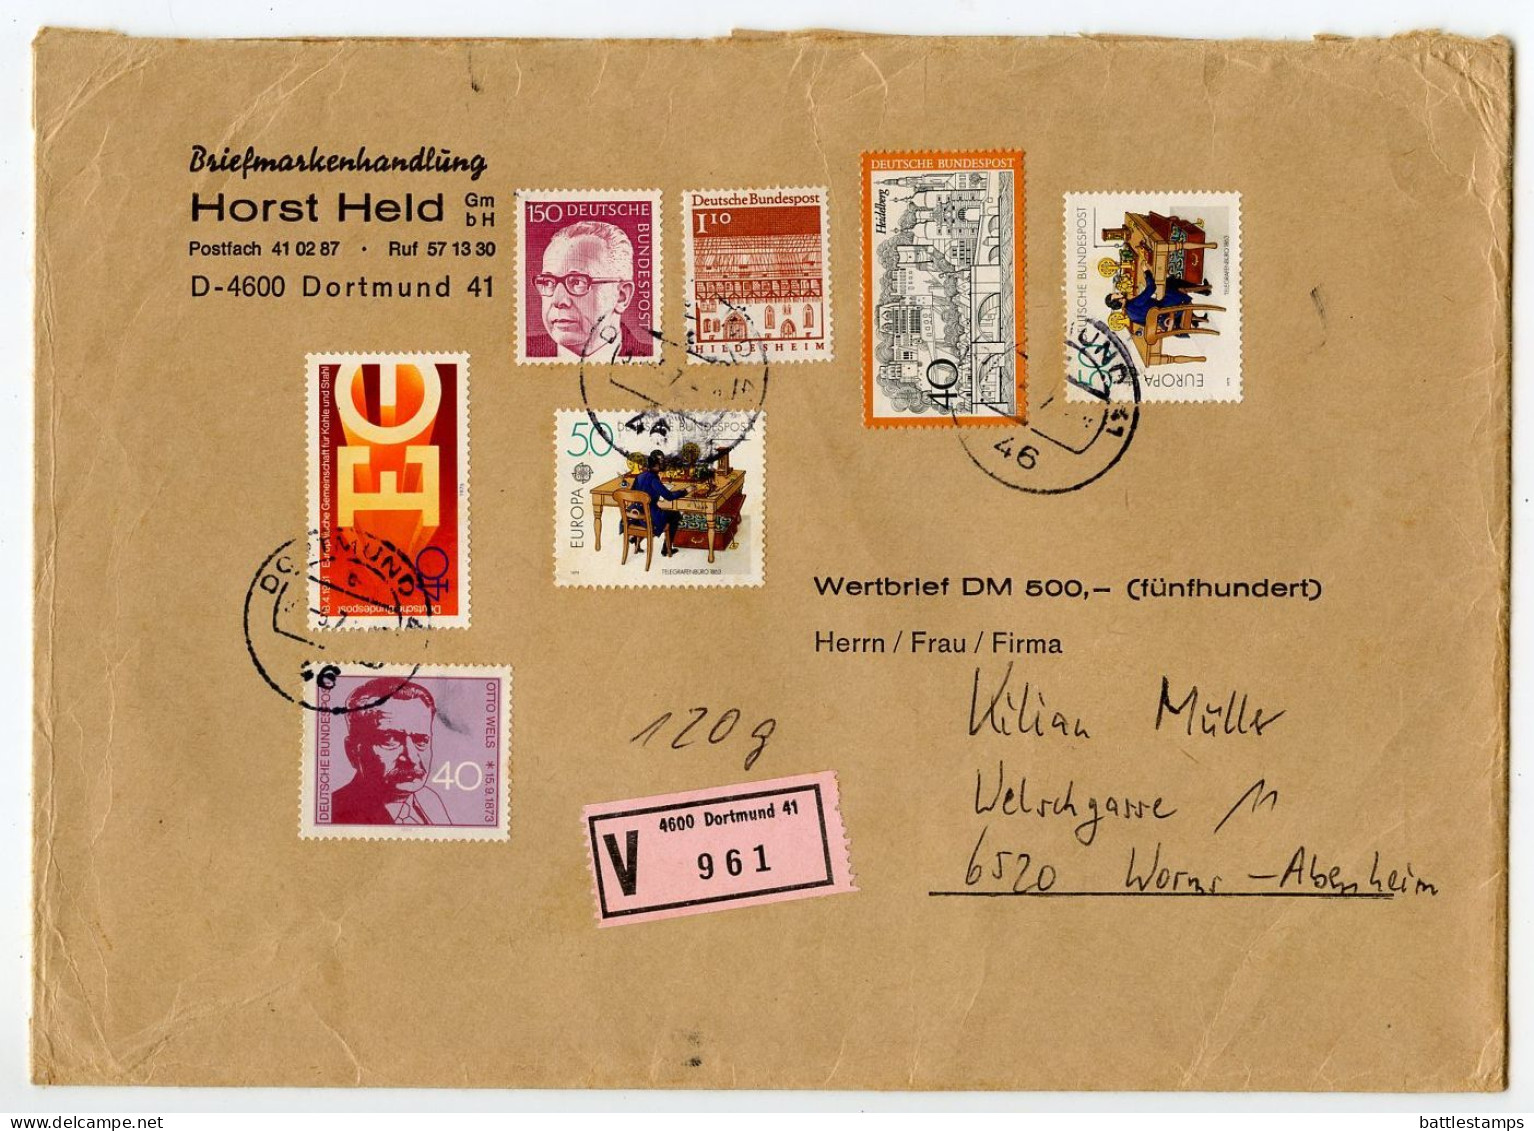 Germany, West 1979 Insured V-Label Cover; Dortmund To Worms-Abenheim; Mix Of Stamps - Covers & Documents